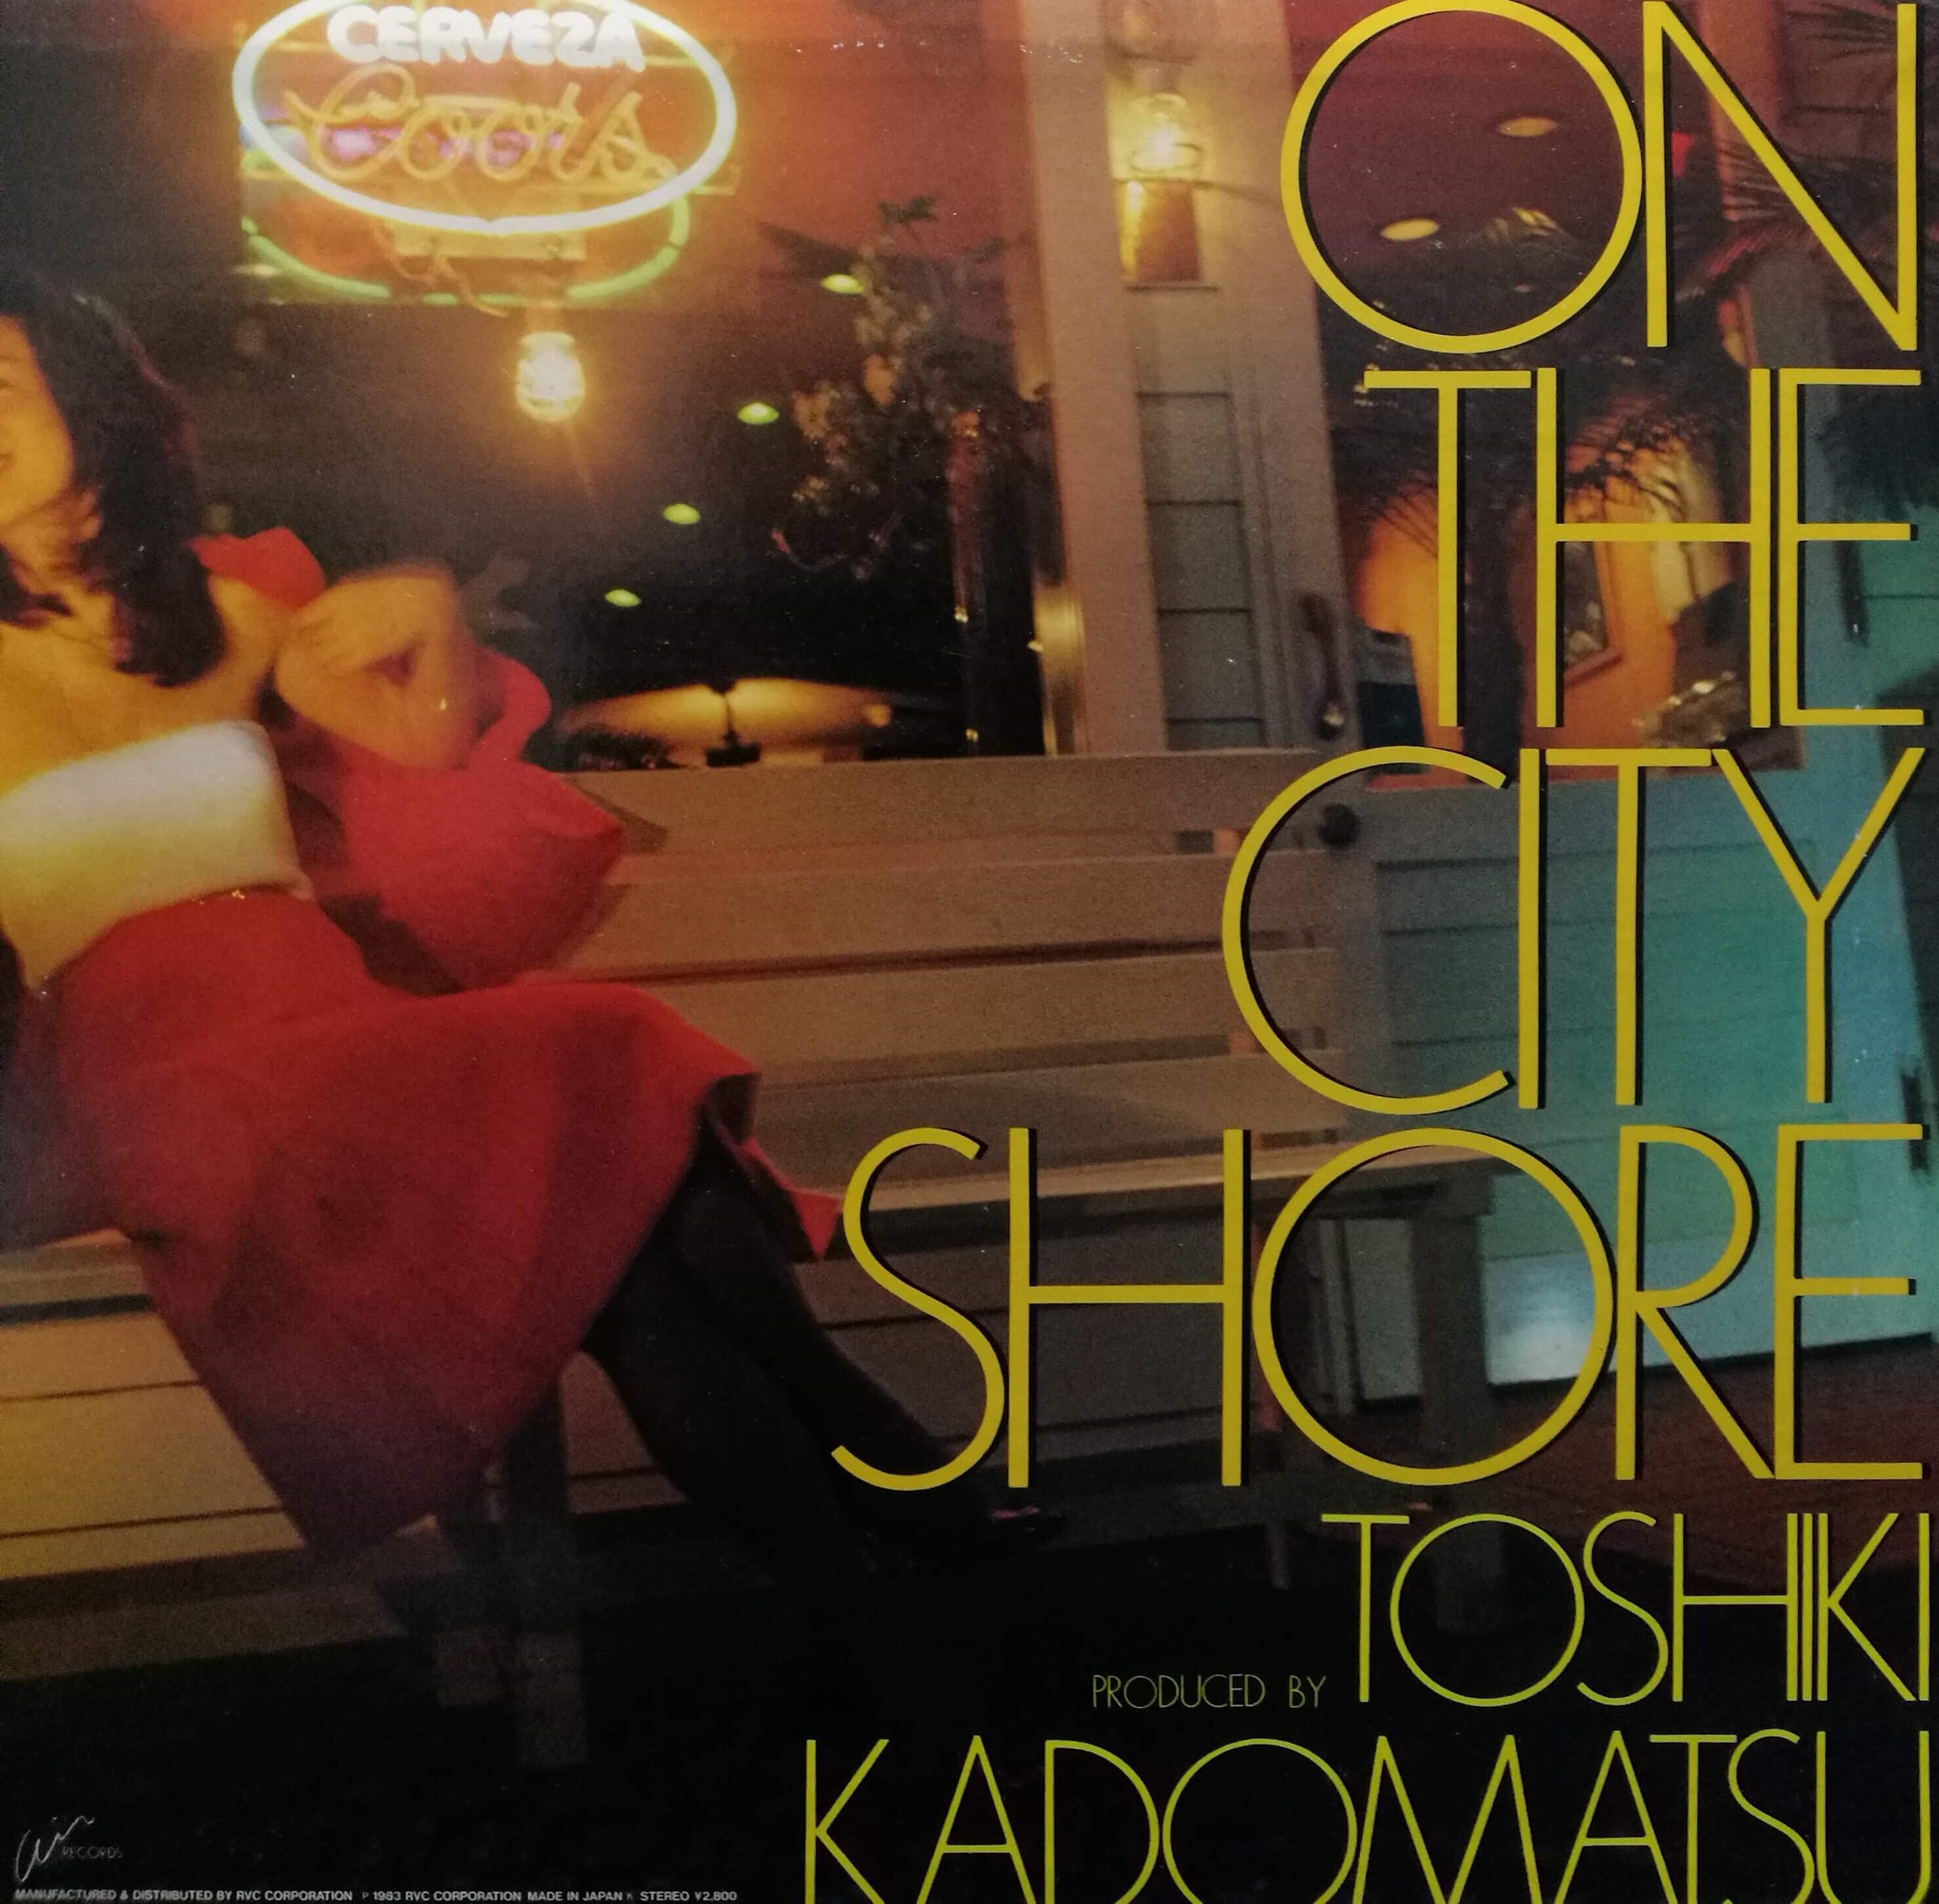 【LP】角松敏生 / On The City Shore | COMPACT DISCO ASIA powered by BASE